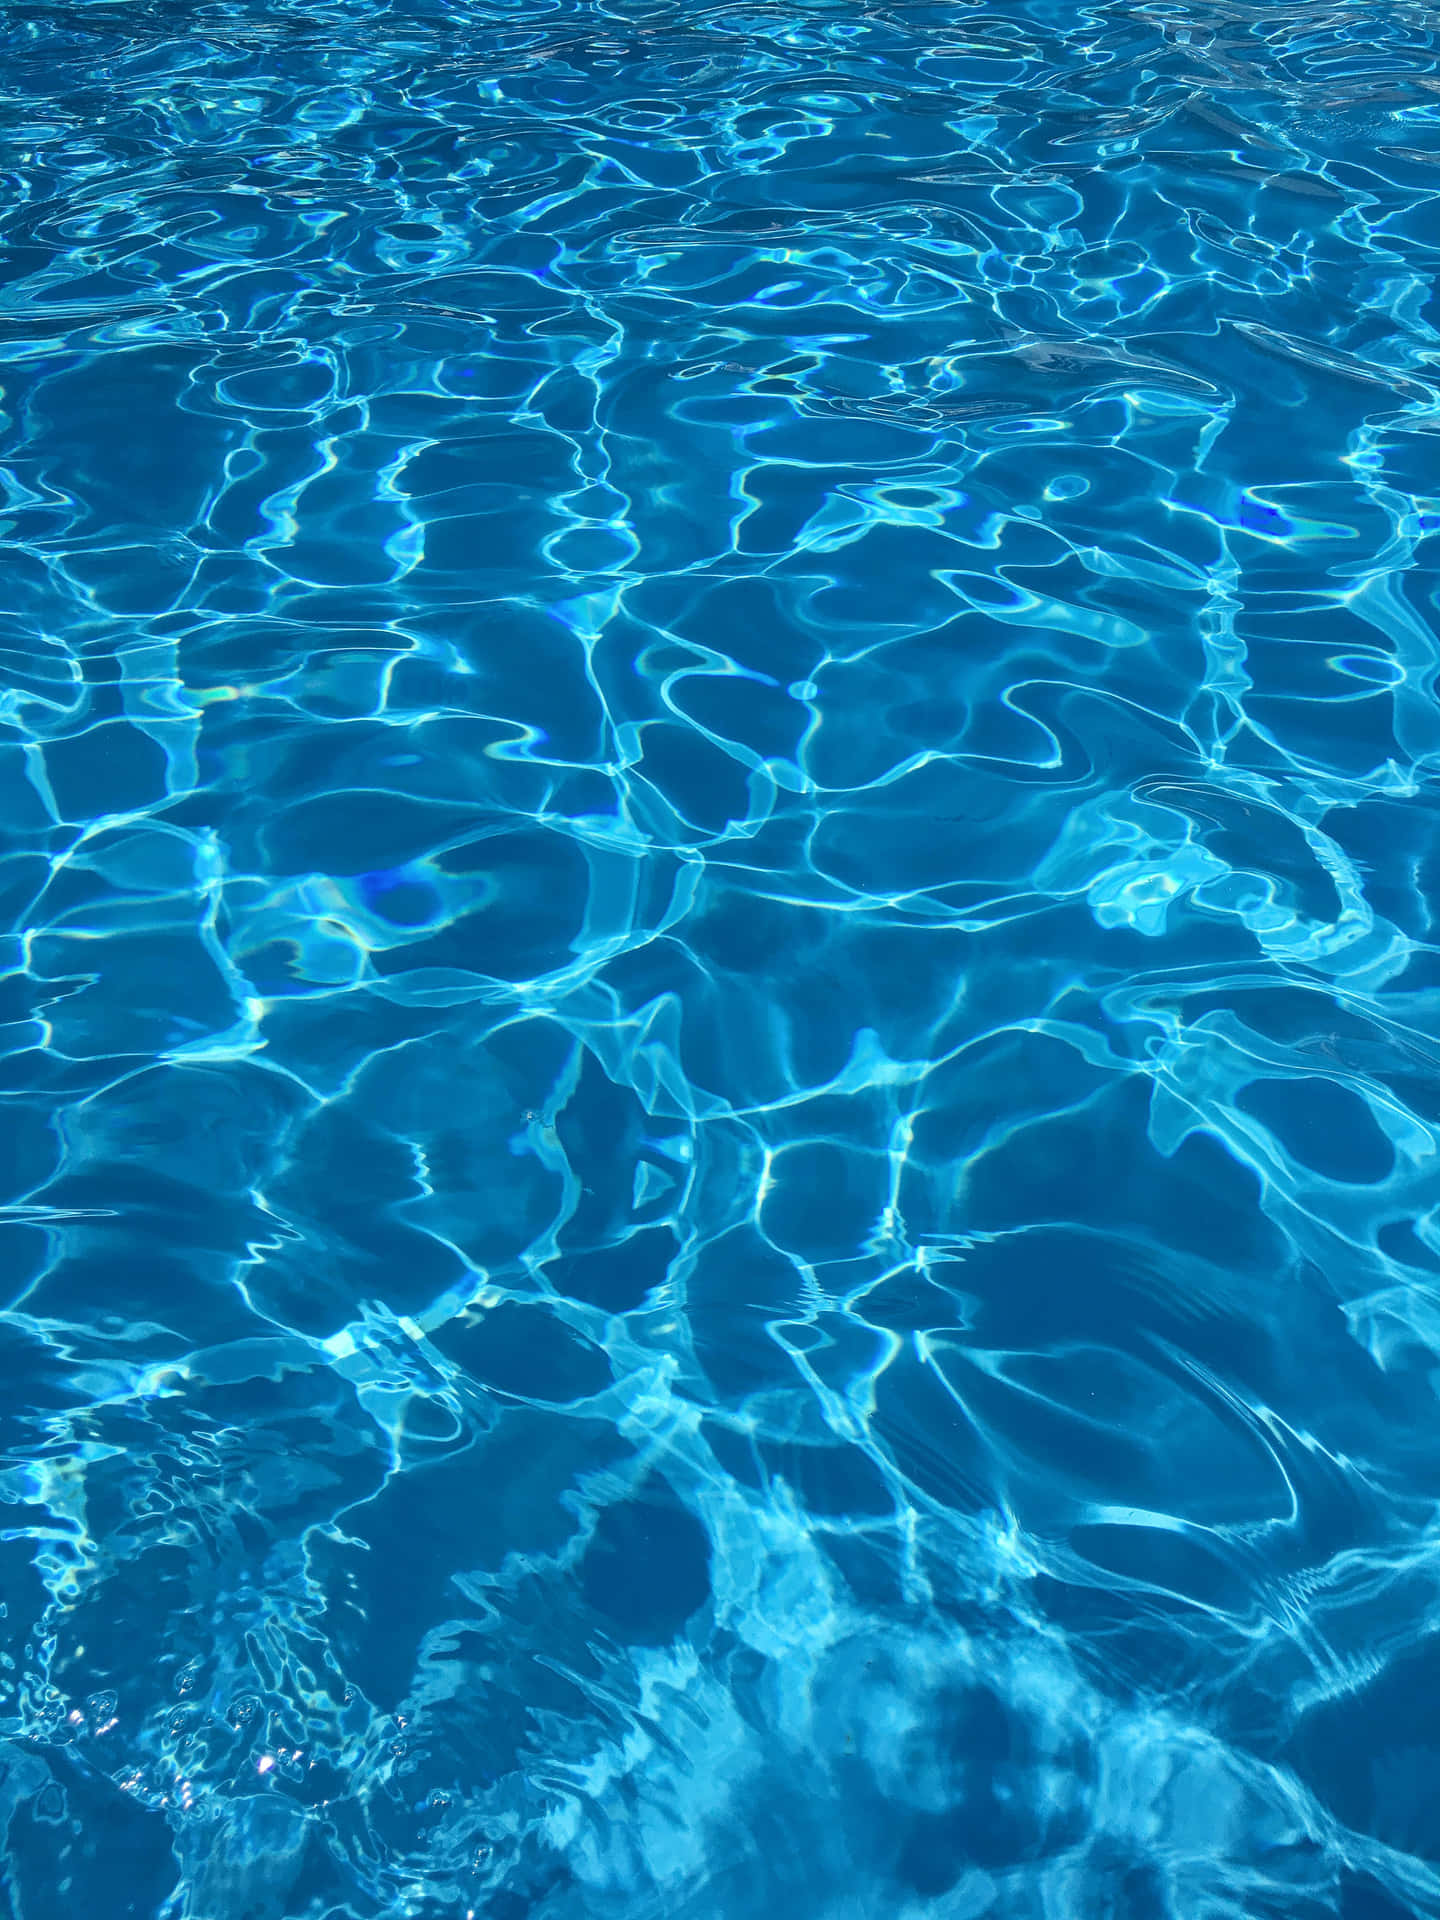 A Blue Pool With Water Ripples